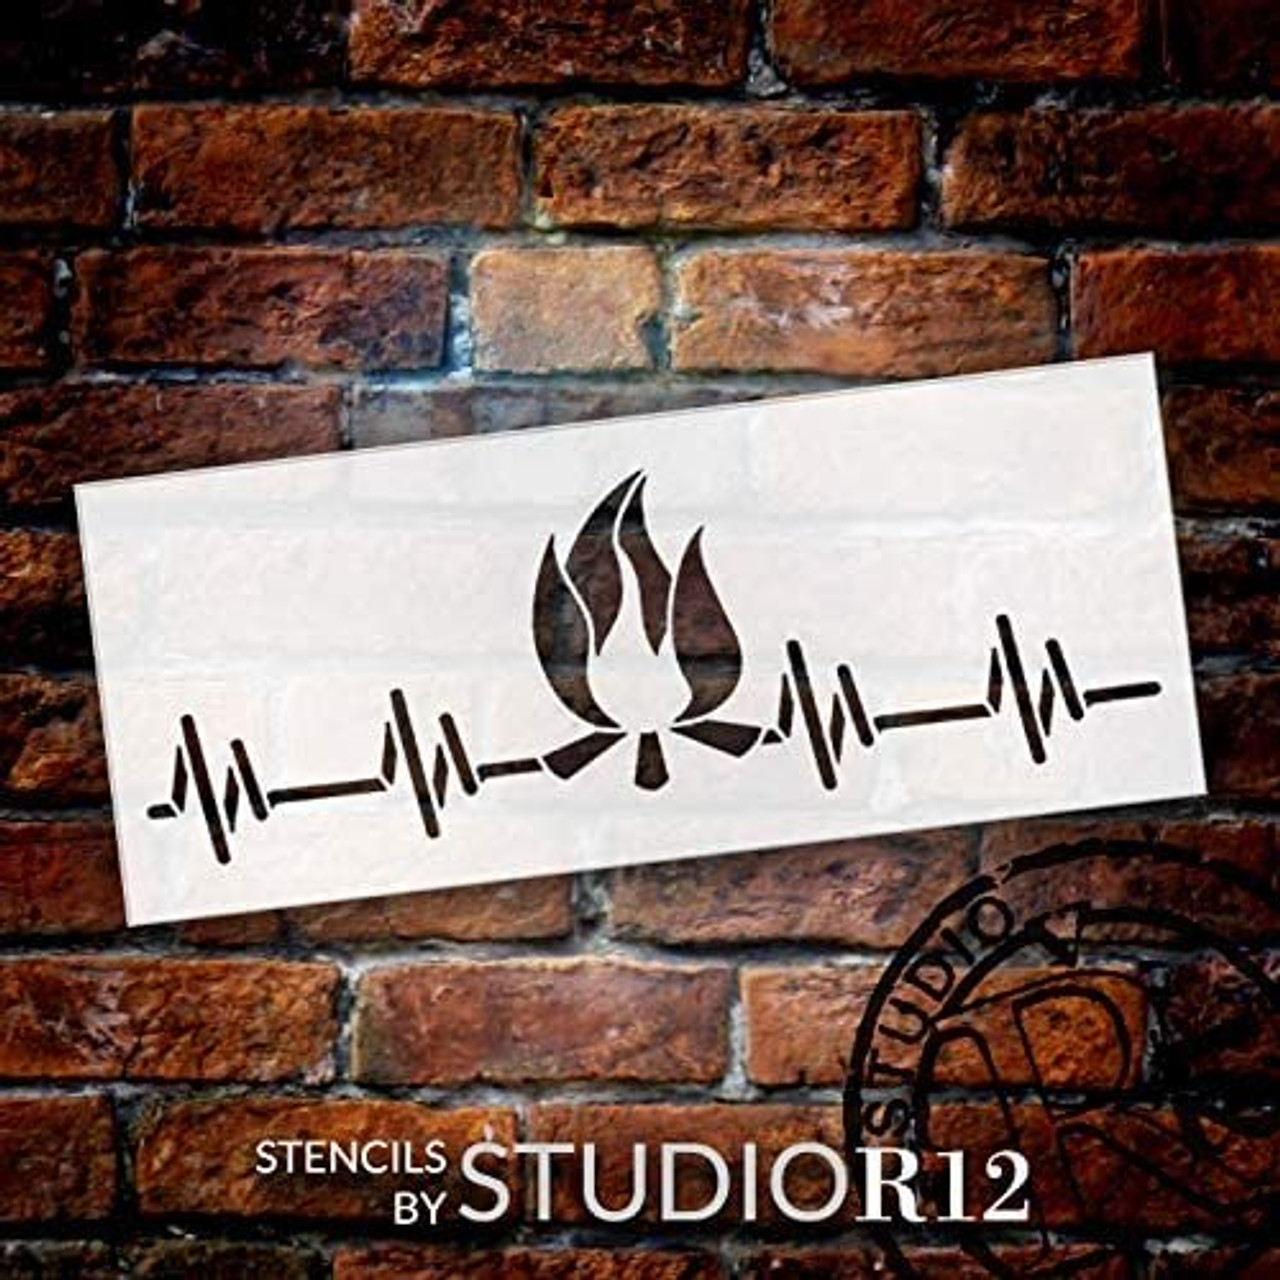 Campfire Heartbeat Pulse Stencil by StudioR12 | DIY Outdoor Adventure Home Decor | Craft & Paint Wood Sign | Reusable Mylar Template | Fun Travel Nature Love| Select Size